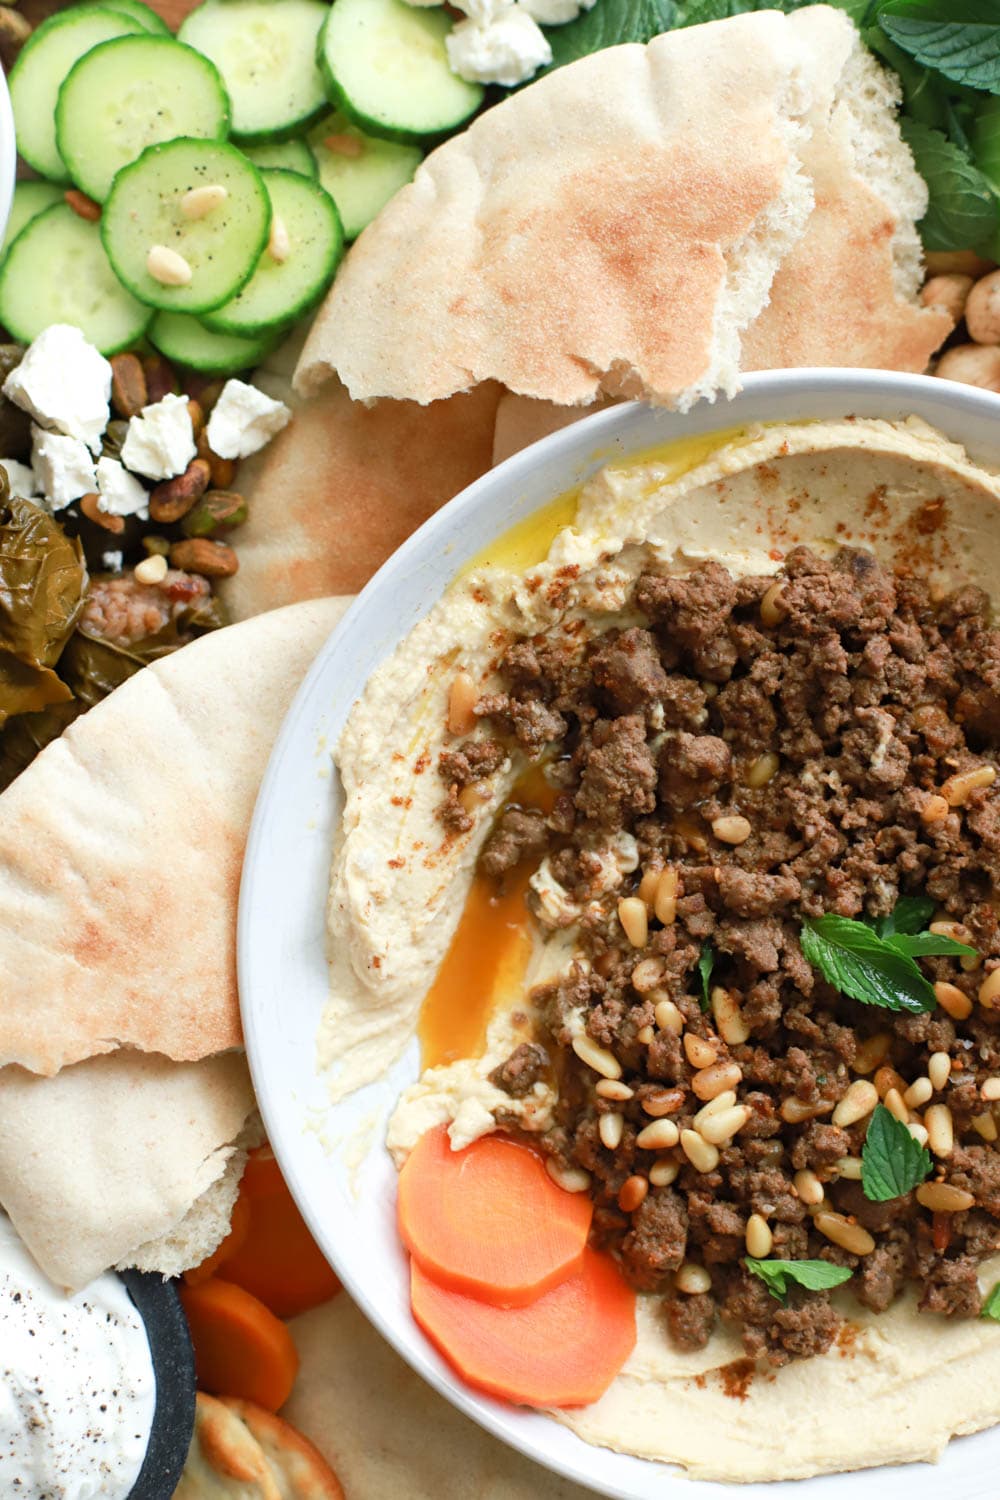 Spiced Ground Meat with Pine Nuts over Hummus Recipe